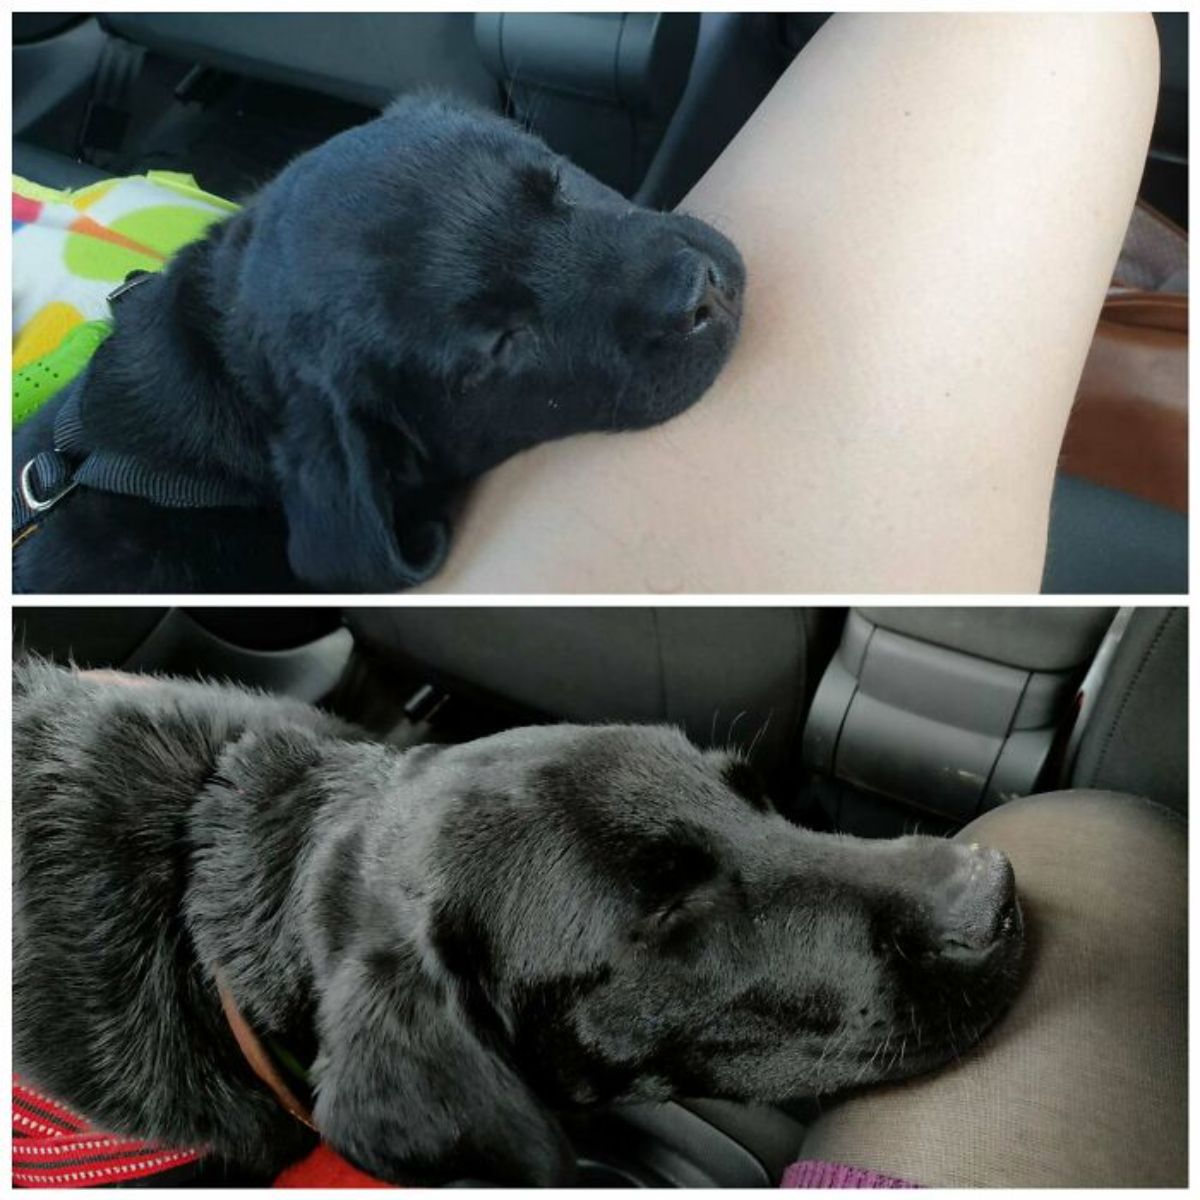 1 photo of black labrador retriever puppy laying head on someone's leg in a vehicle and 1 photo of the same dog as an adult doing the same thing